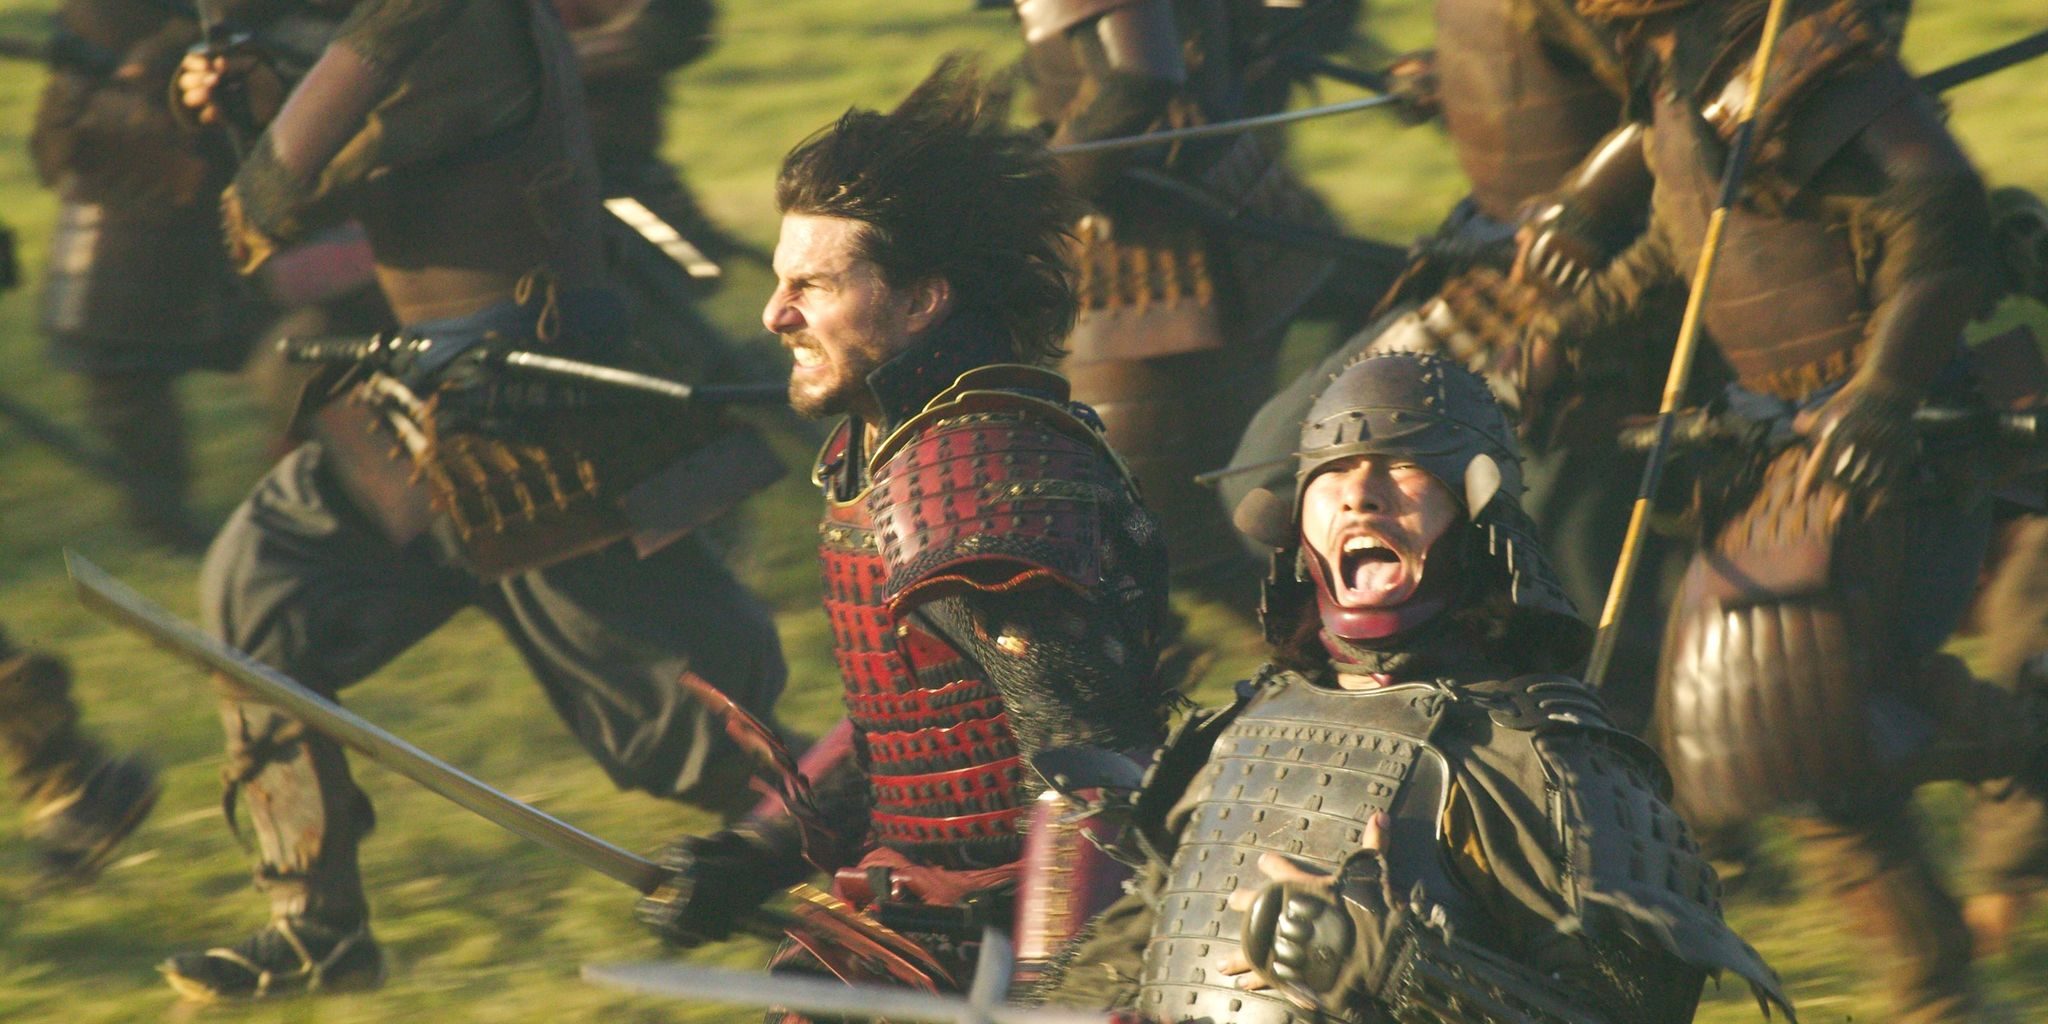 Is The Last Samurai Based on A True Story?